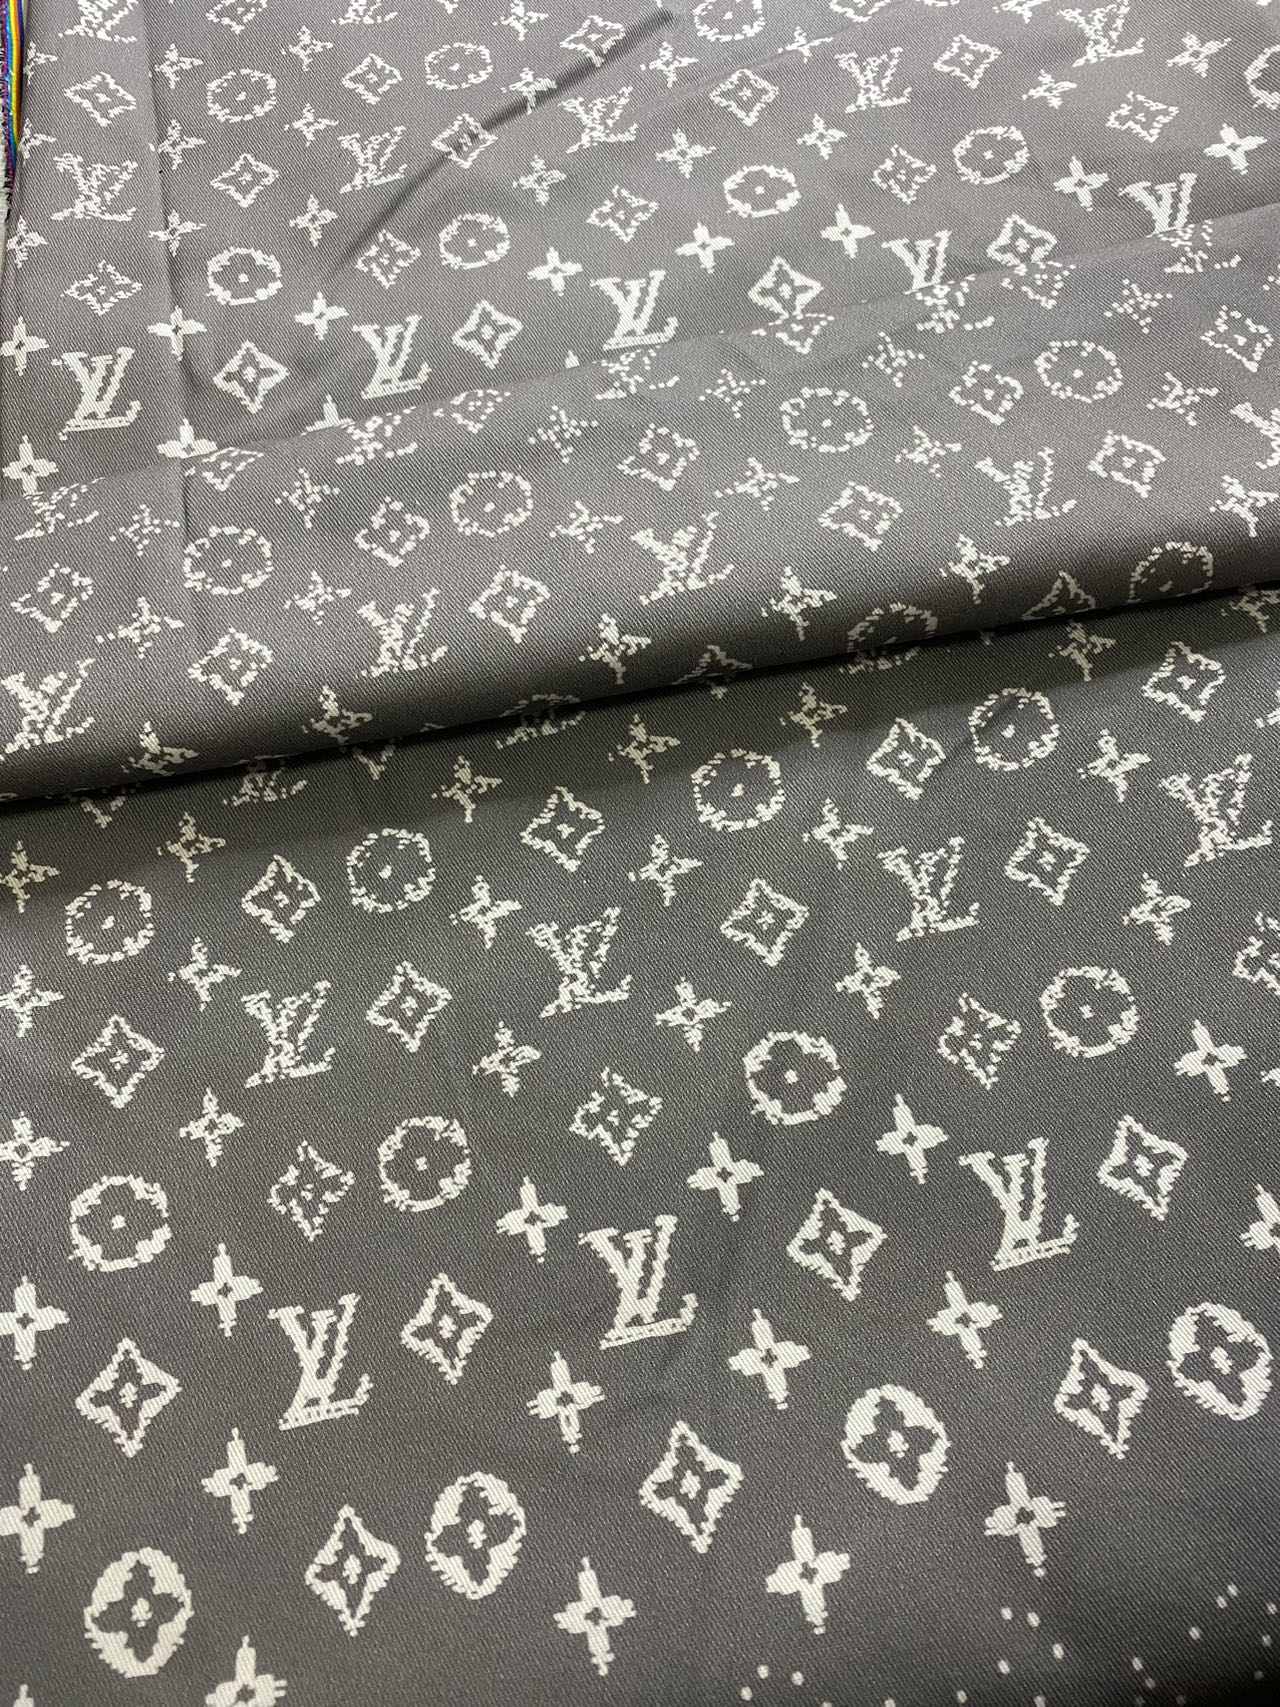 Grey LV Gradient Cotton Fabric for Clothing DIY Crafts Handmade Sold by Yard